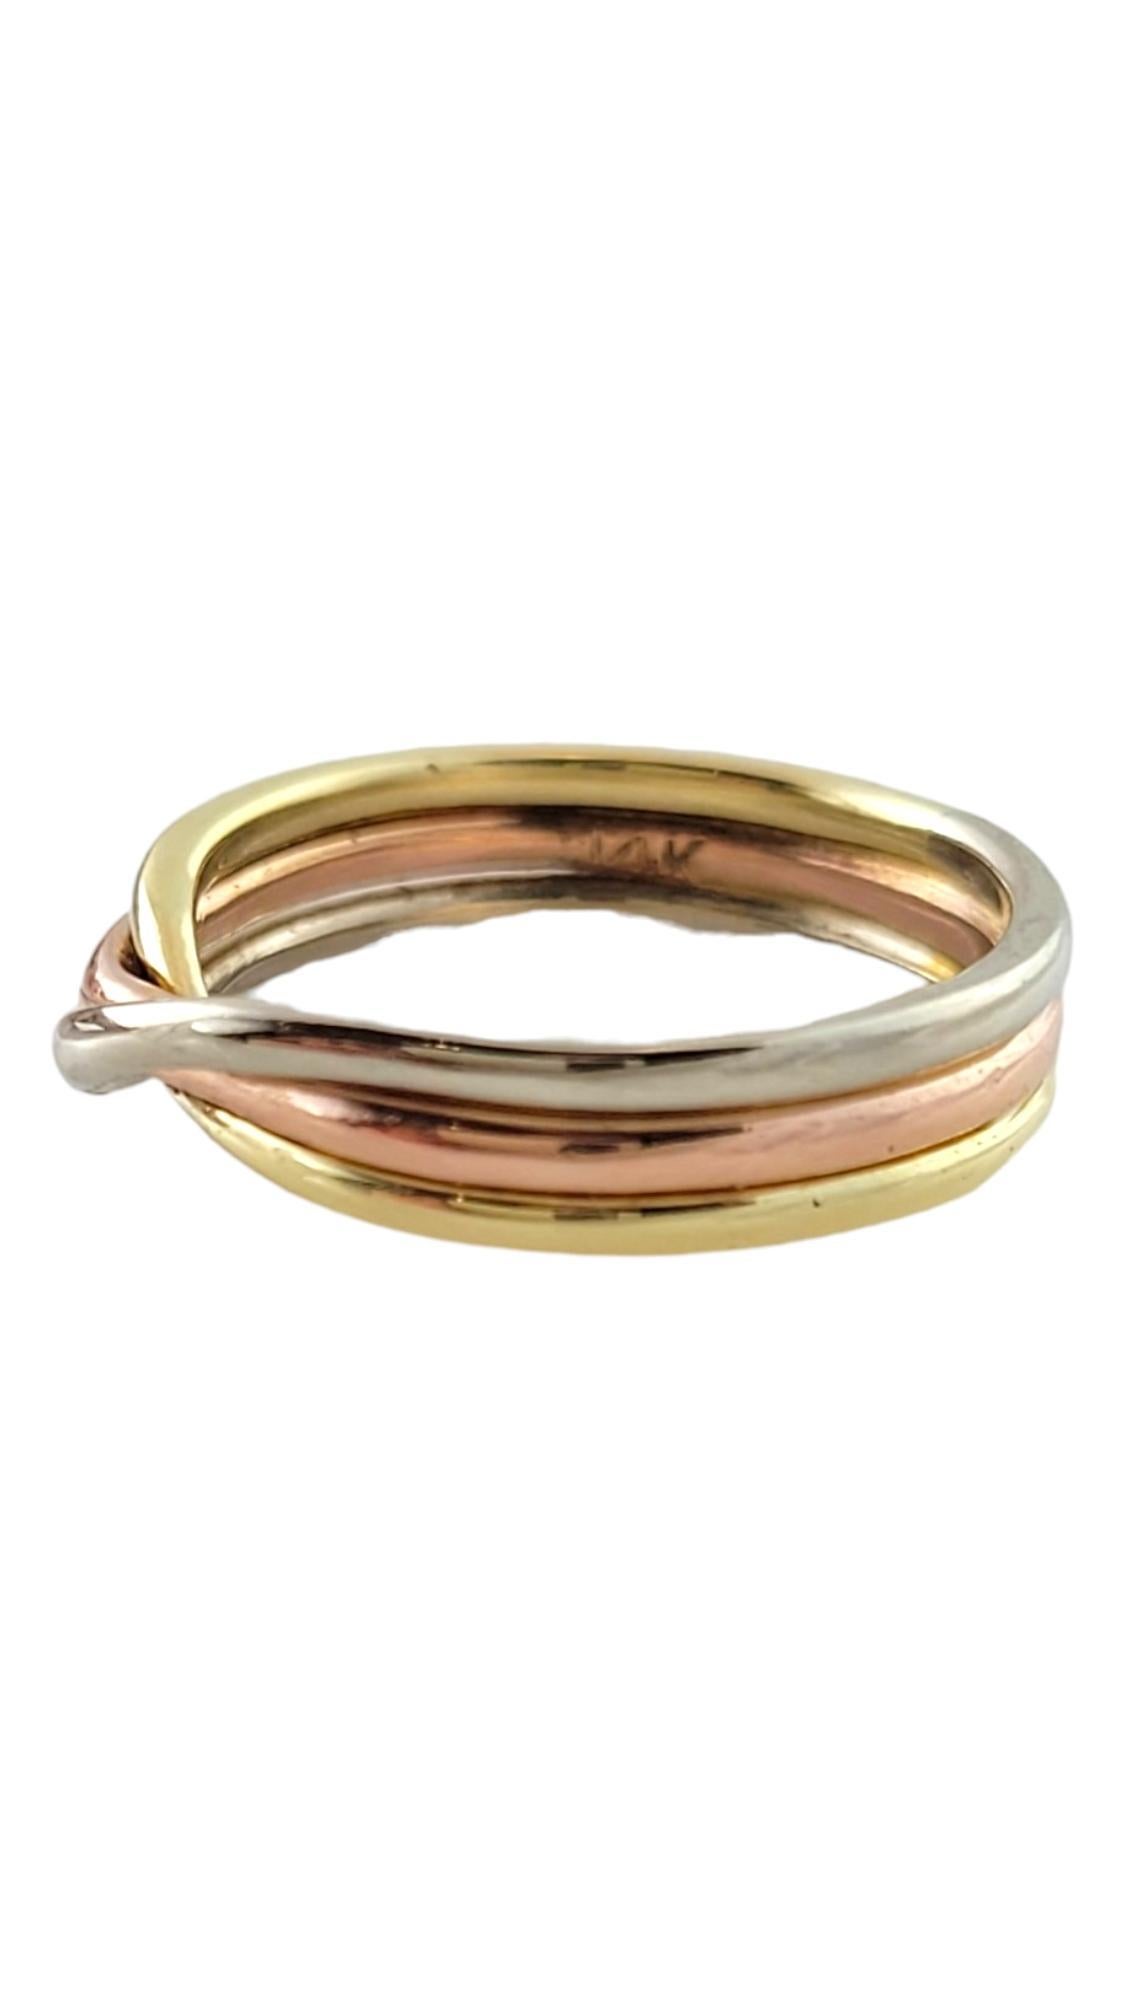 14K Tri Colored 3 Band Ring Size 5.25-5.5

This gorgeous 3 band ring is crafted from beautiful 14K yellow, white, and rose gold for a beautiful finish!

Ring size: 5.25-5.5
Shank: 4.37mm

Weight: 2.25 dwt/ 3.50 g

Hallmark: 14K

Very good condition,